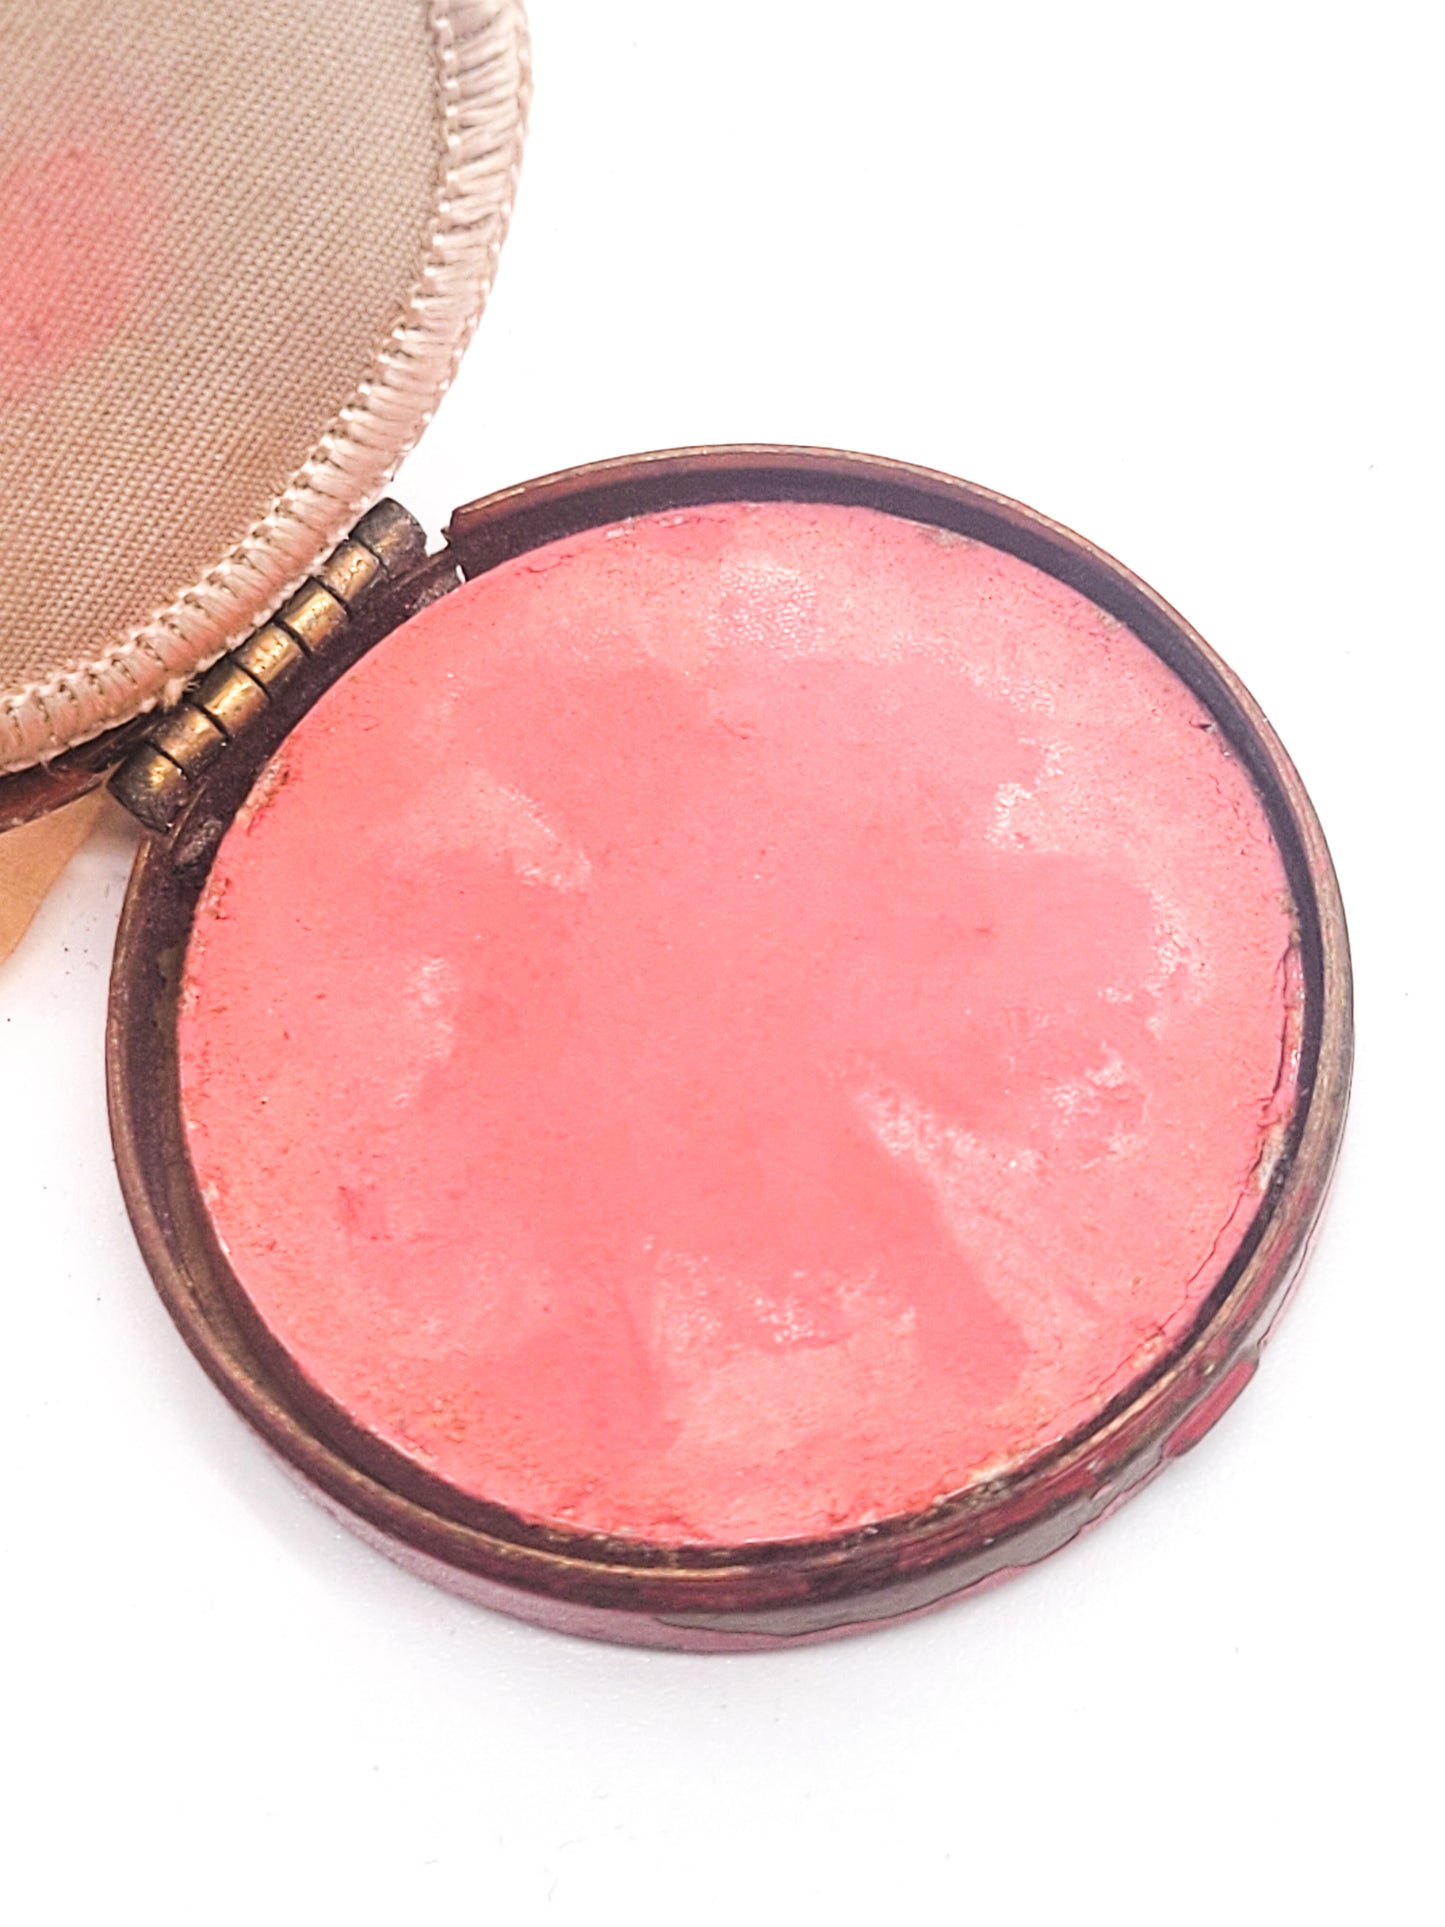 Armand Rouge vintage unused powder puff mirrored compact